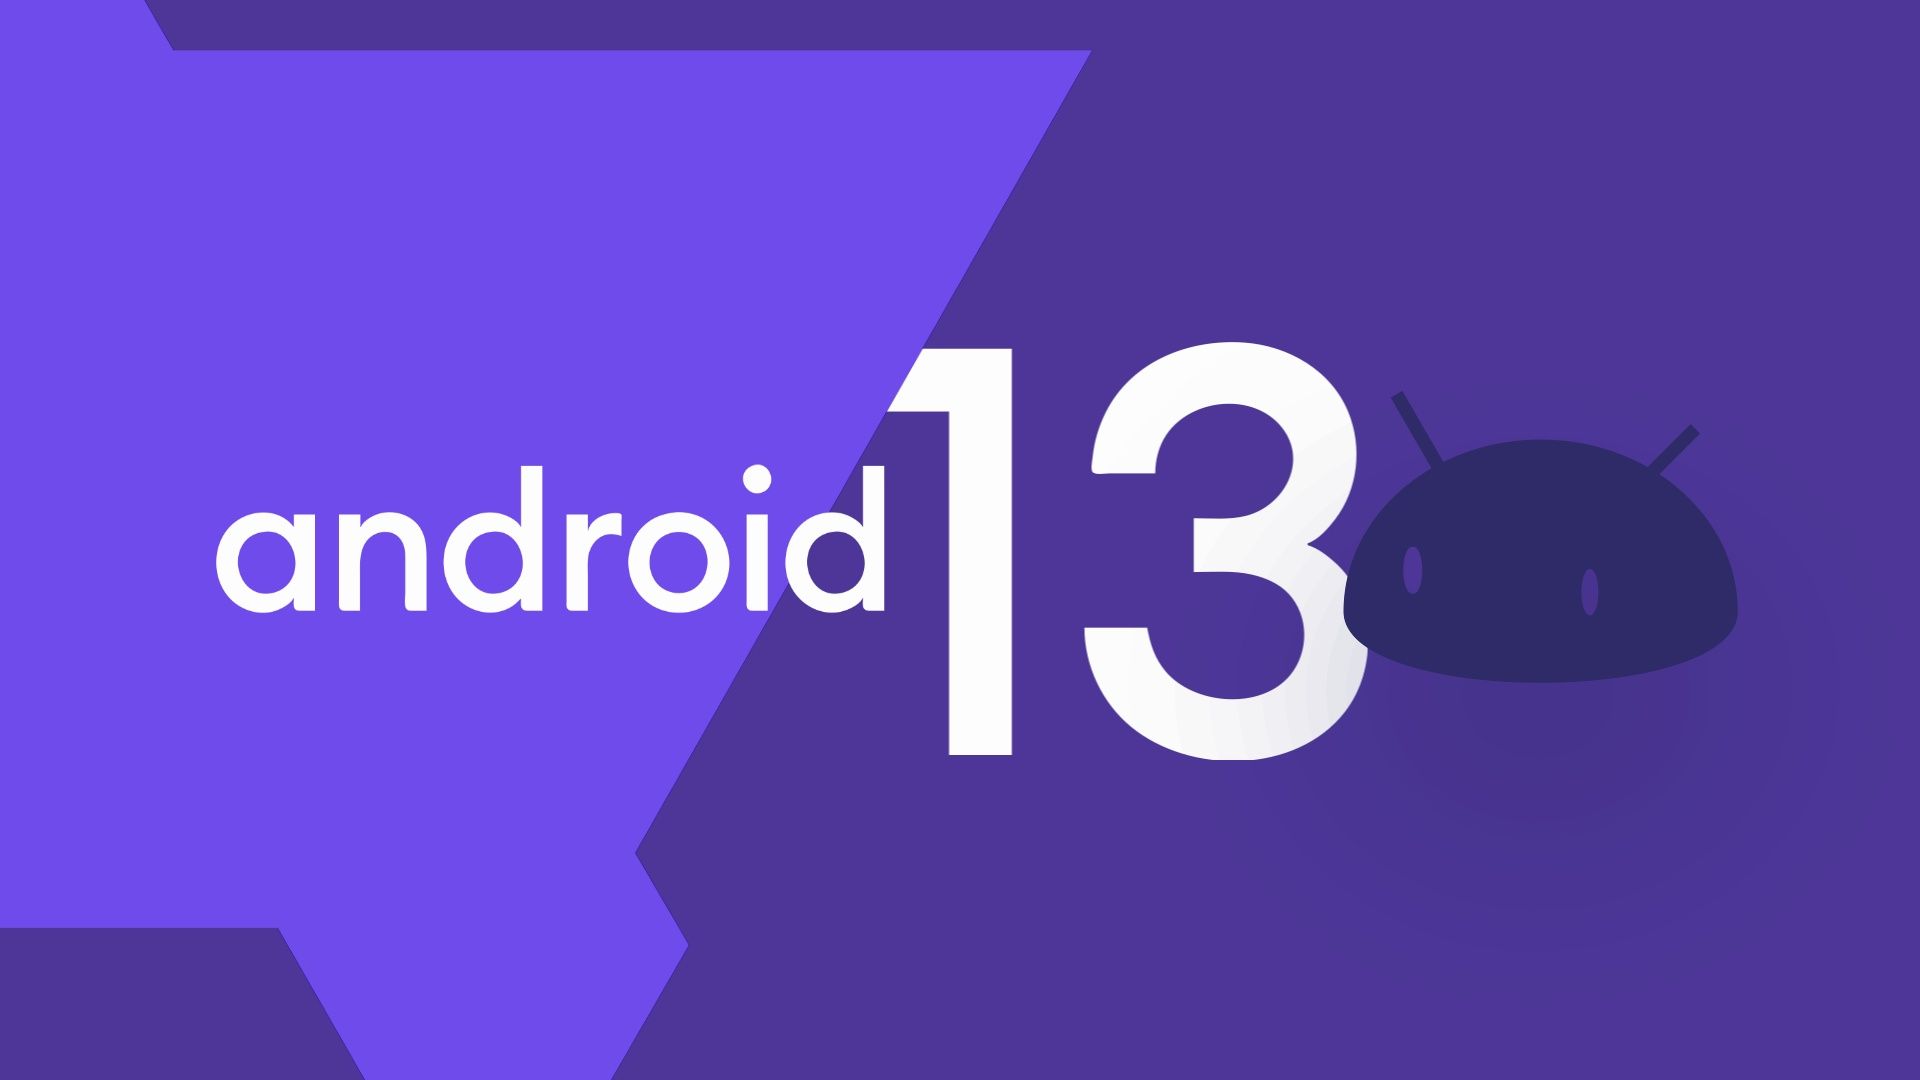 The Android 13 logo against a purple background.